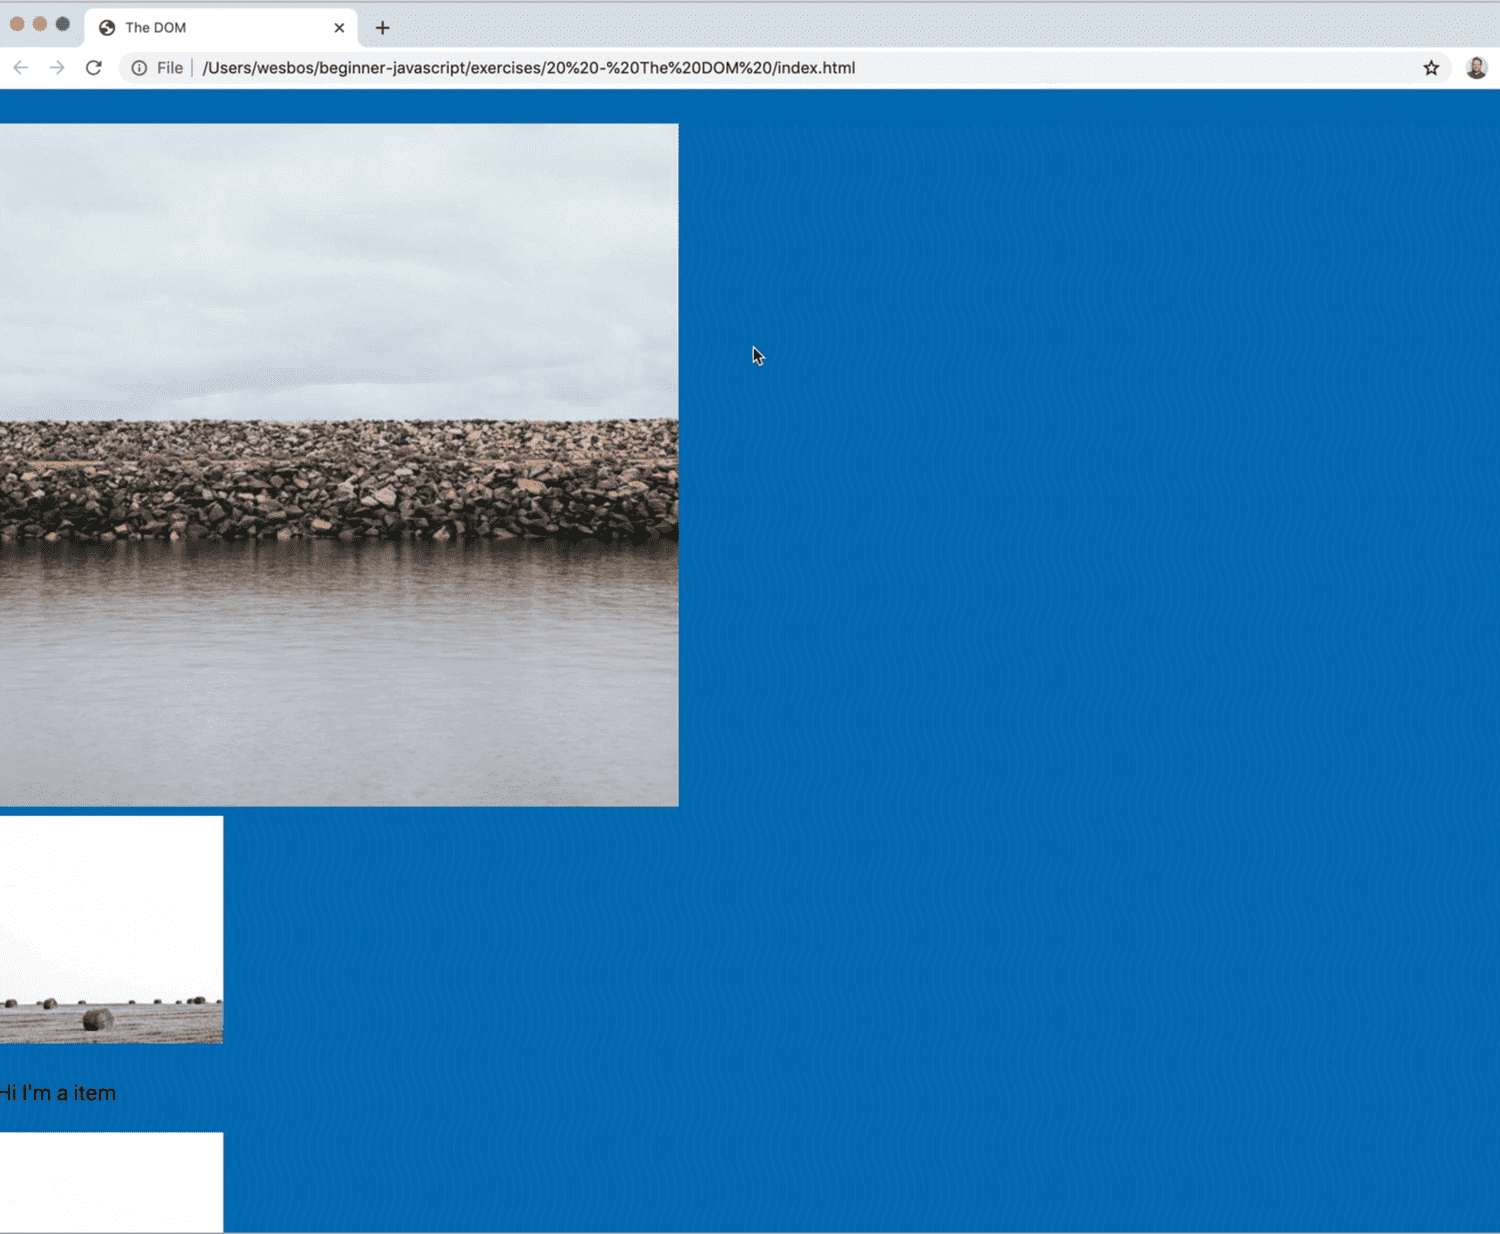 webpage with multiple images on it